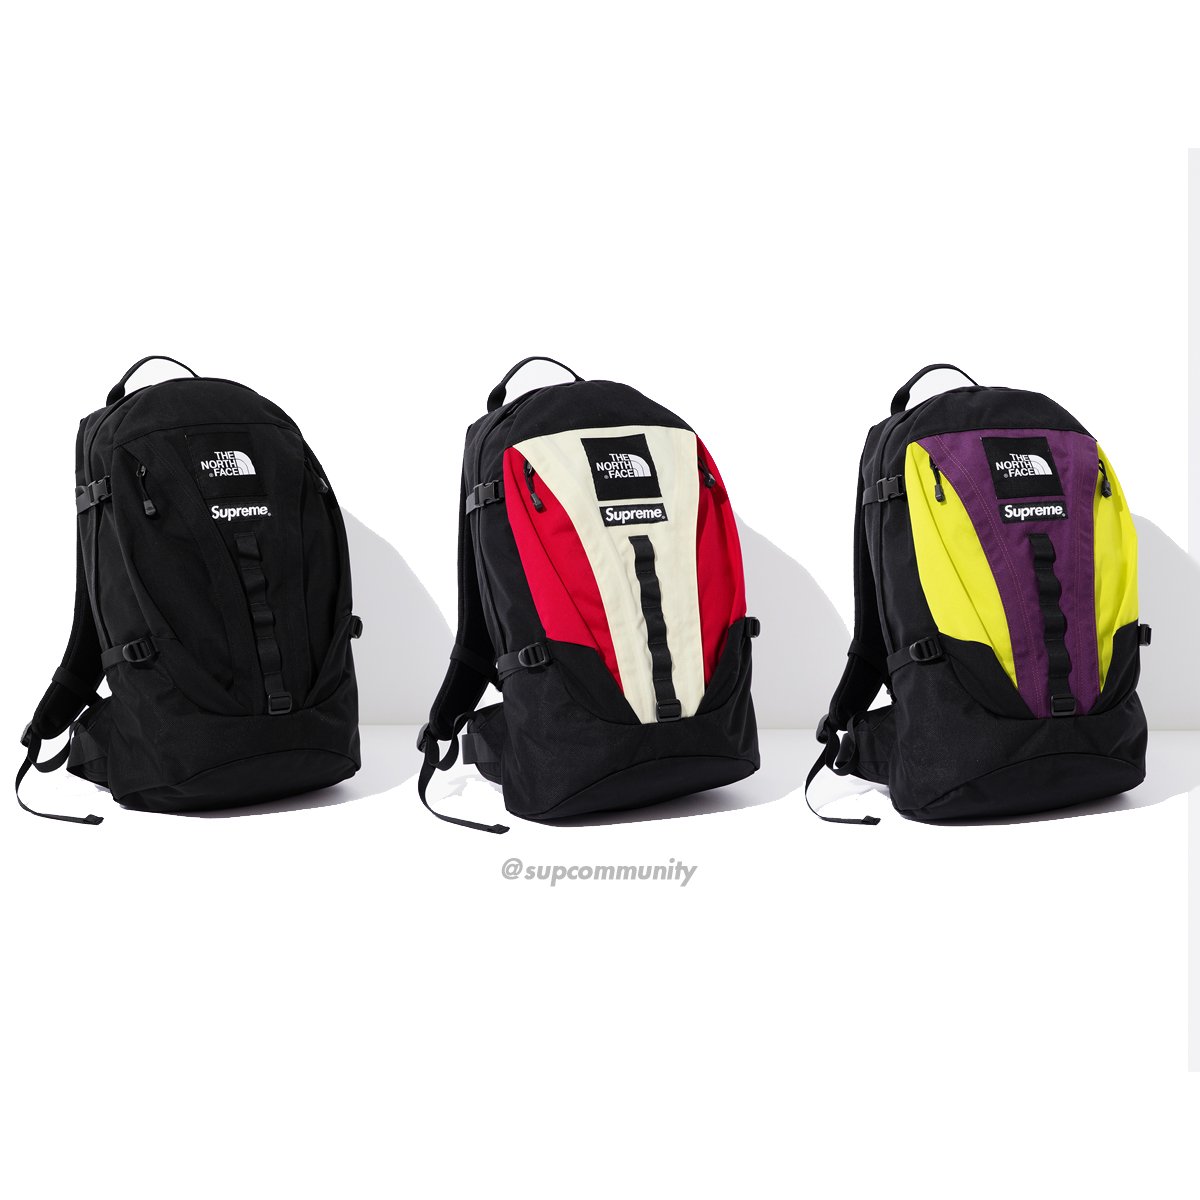 Supreme The North FaceExpeditionBackpack